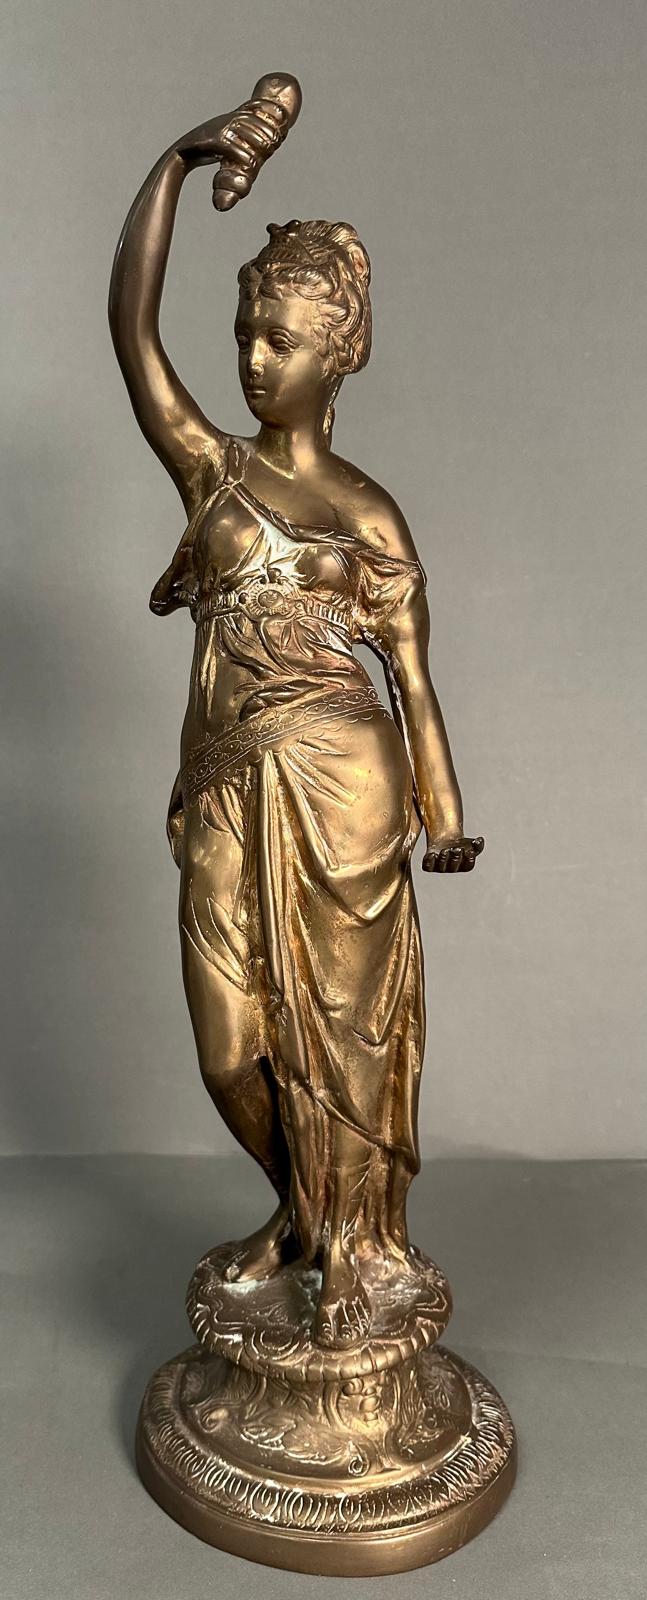 A brass sculpture of the Goddess Thetis, Goddess of the Sea in the classical pose (H57cm)